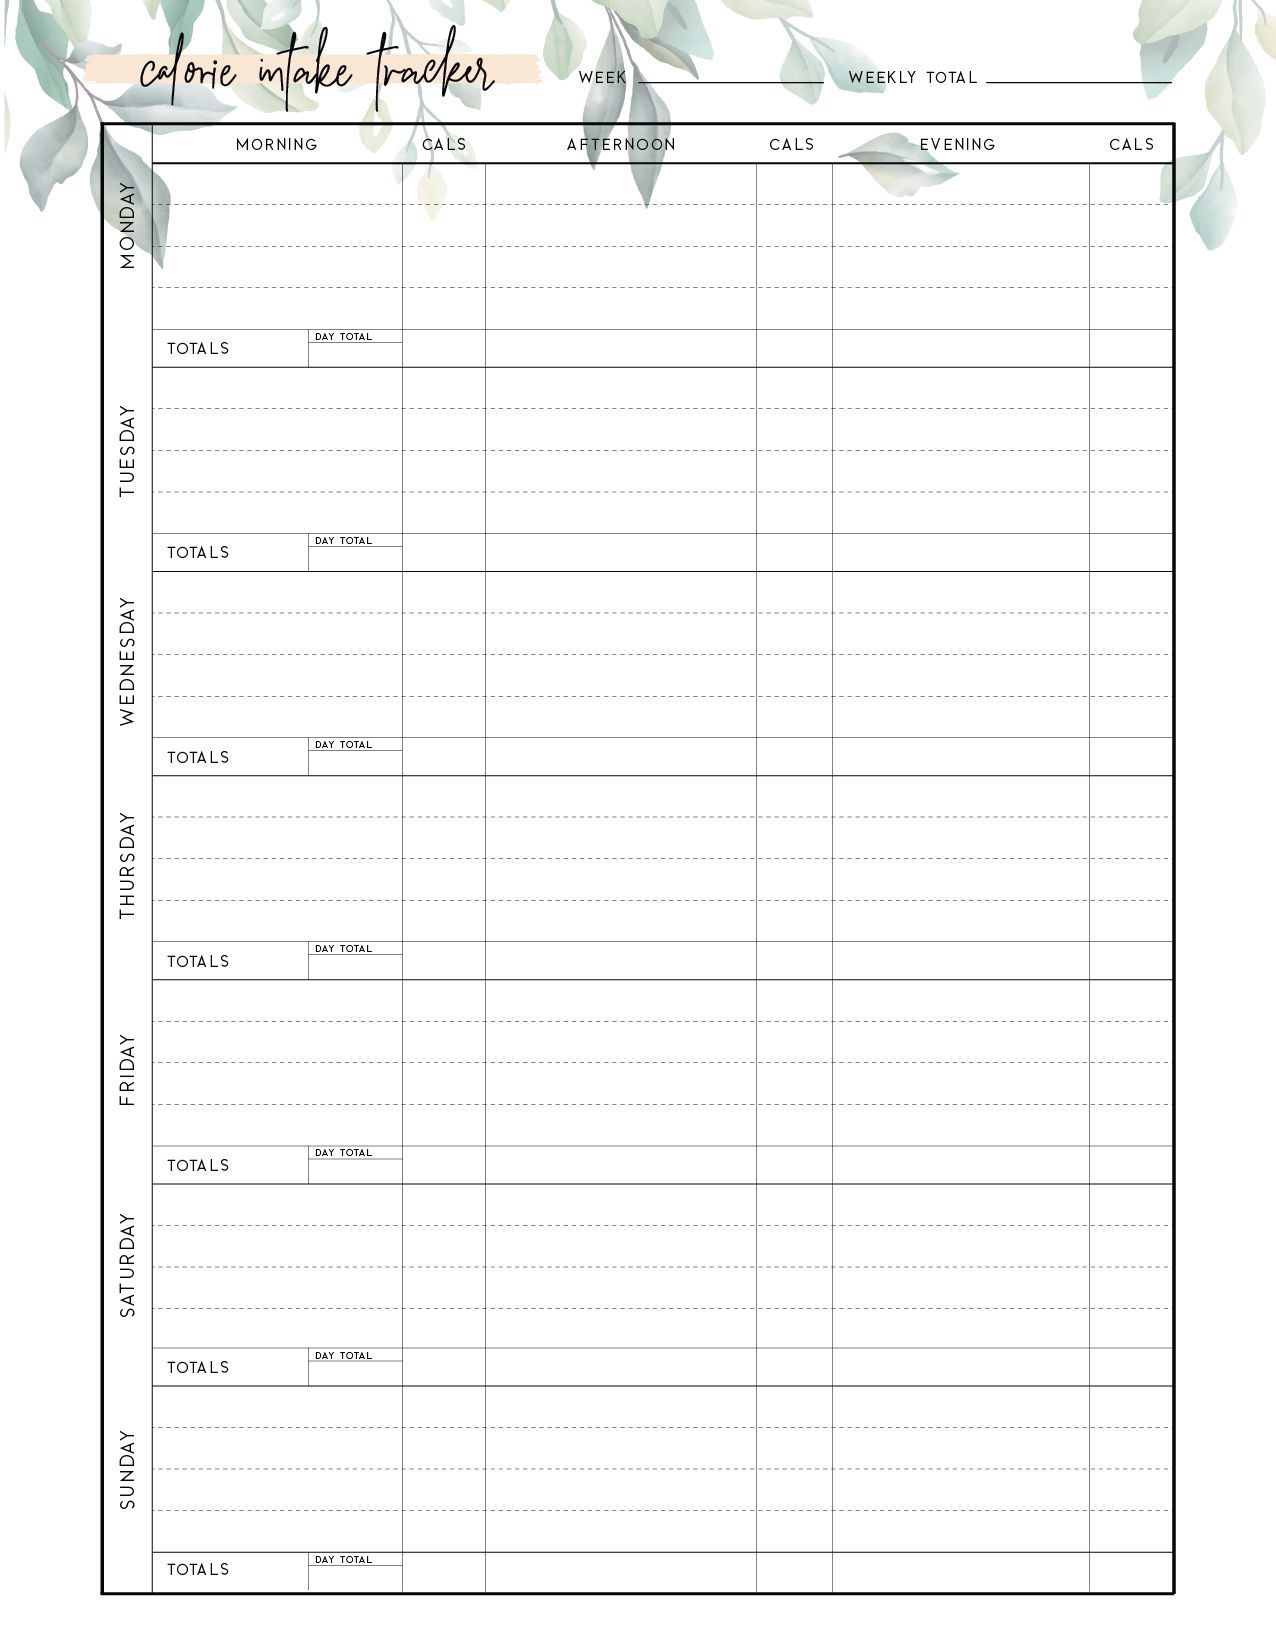 Free Printable Calorie Tracker Calorie Tracker Tracker Free Calorie - Free Printable Calorie Counter Journal